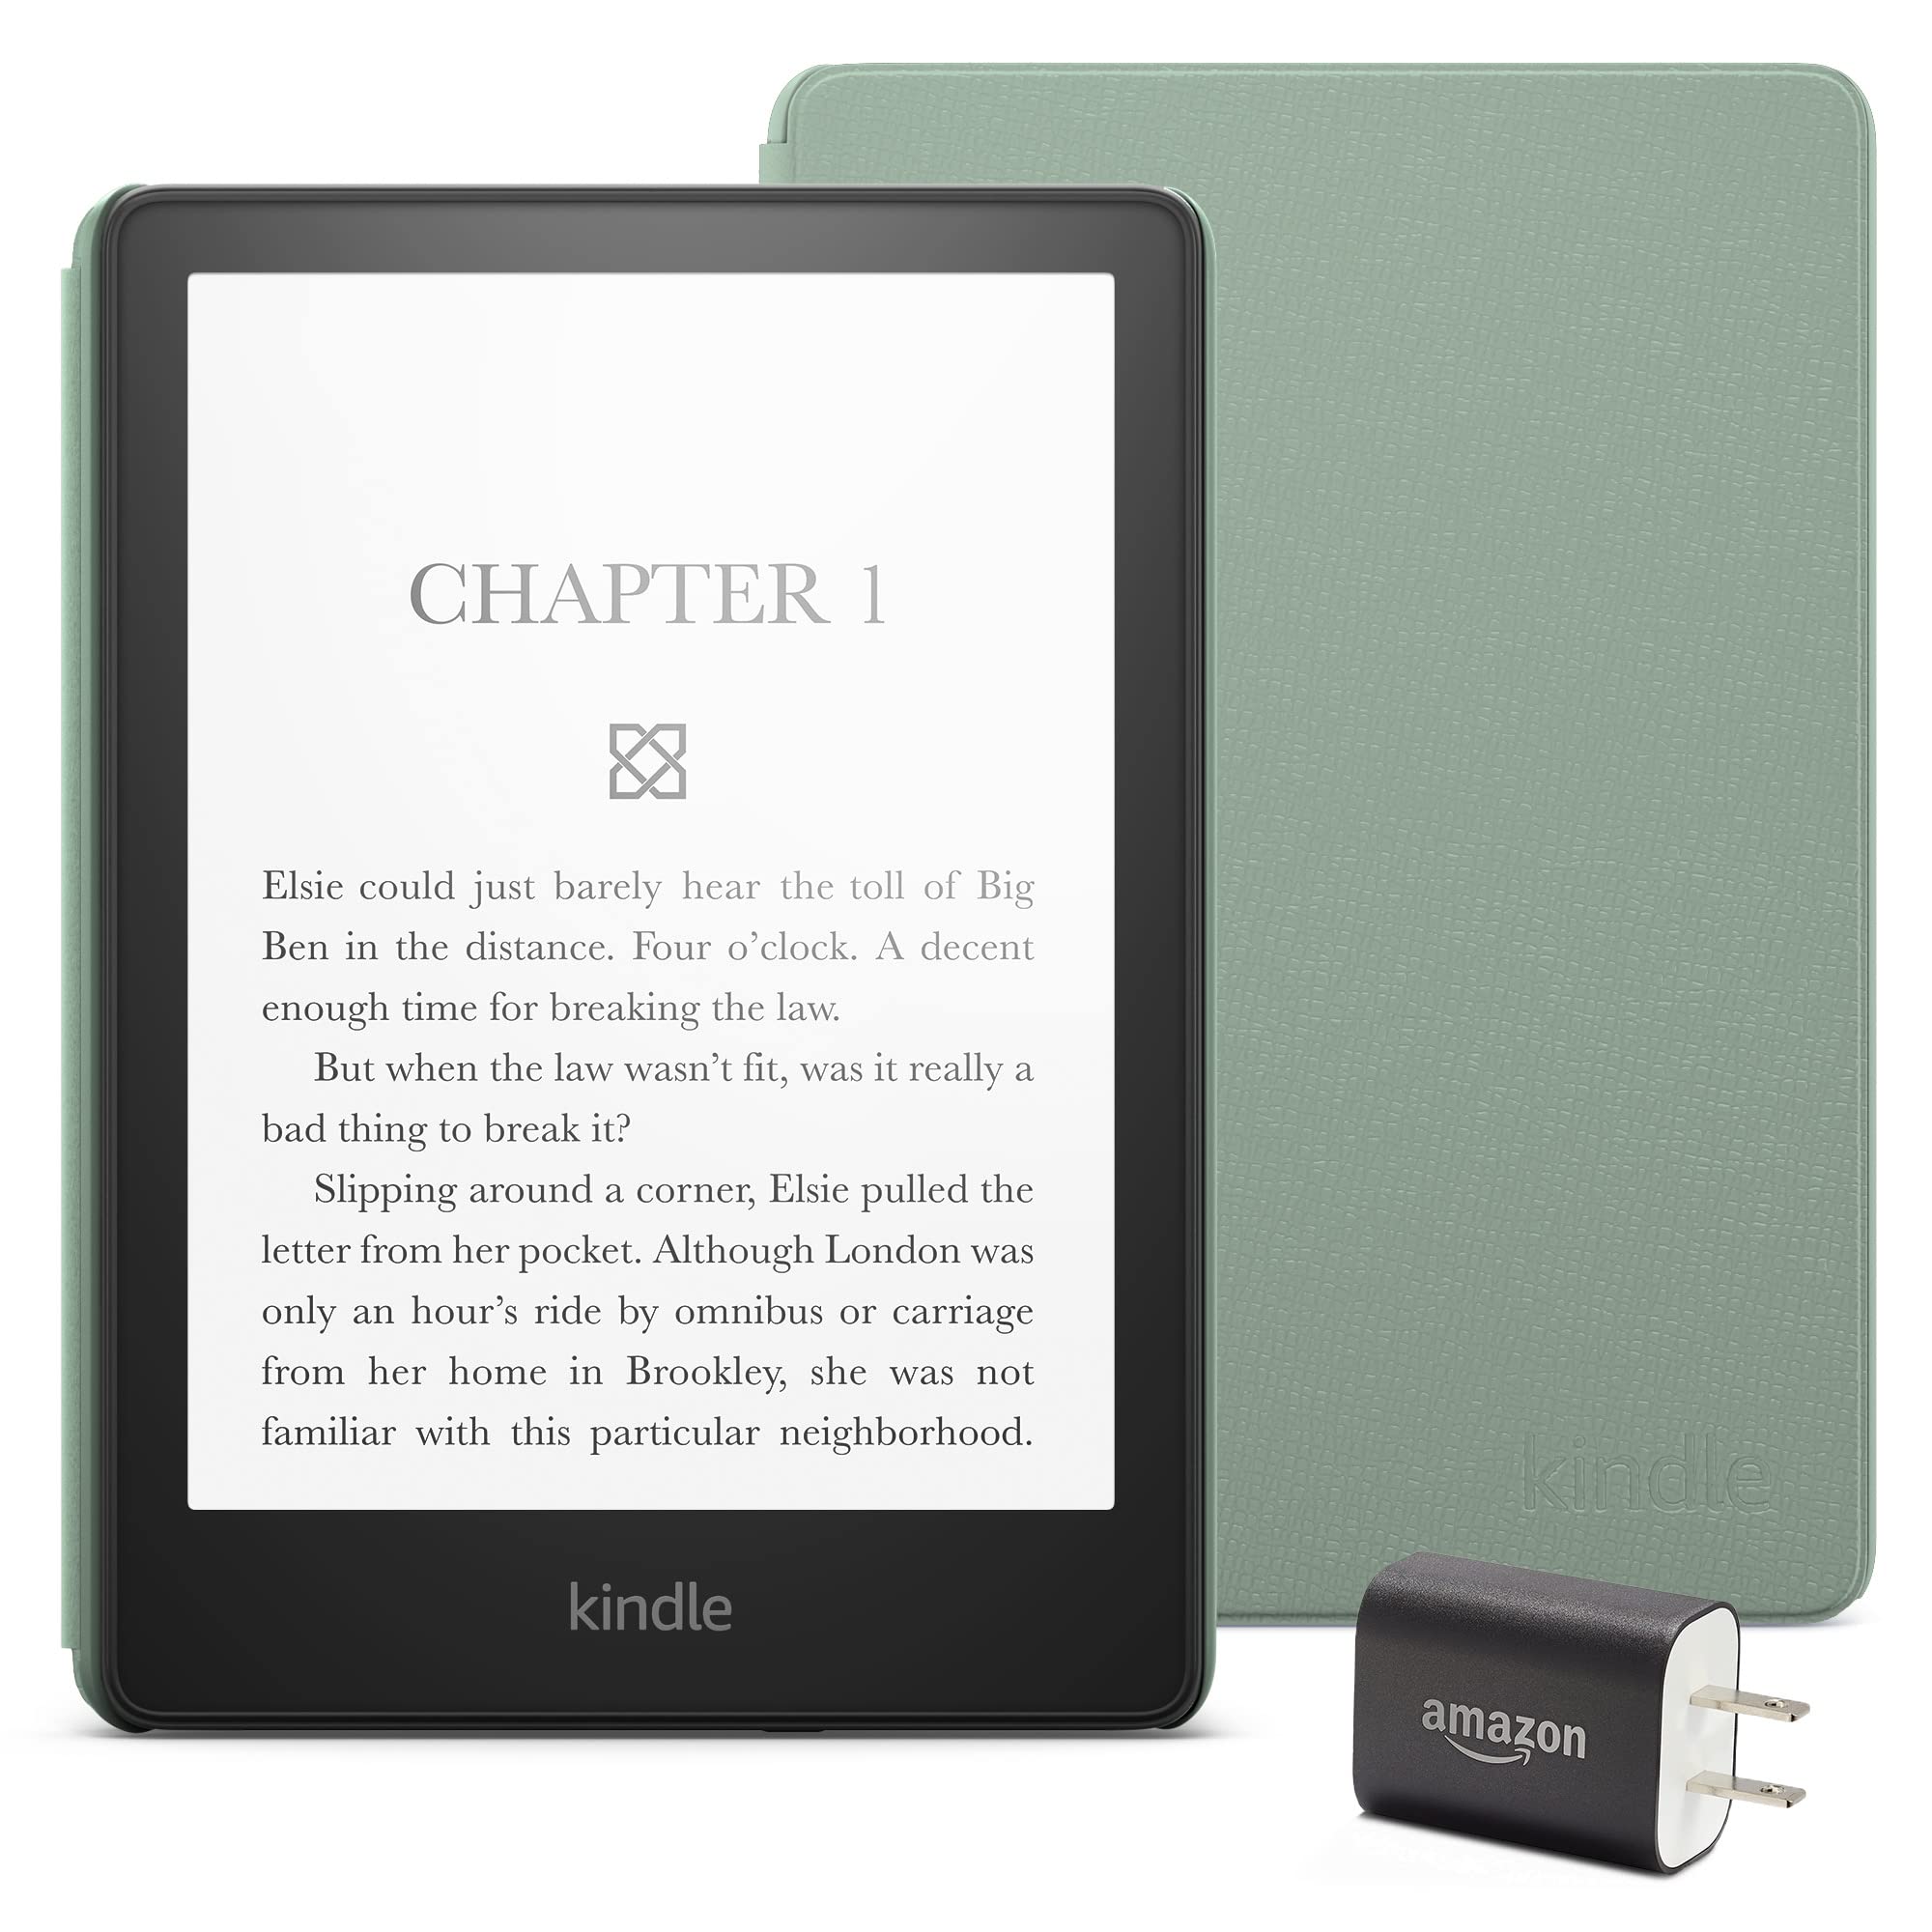 Kindle Paperwhite Essentials Bundle including Kindle Paperwhite (16 GB) - Black - Without Lockscreen Ads, Leather Cover - Agave Green, and Power Adapter